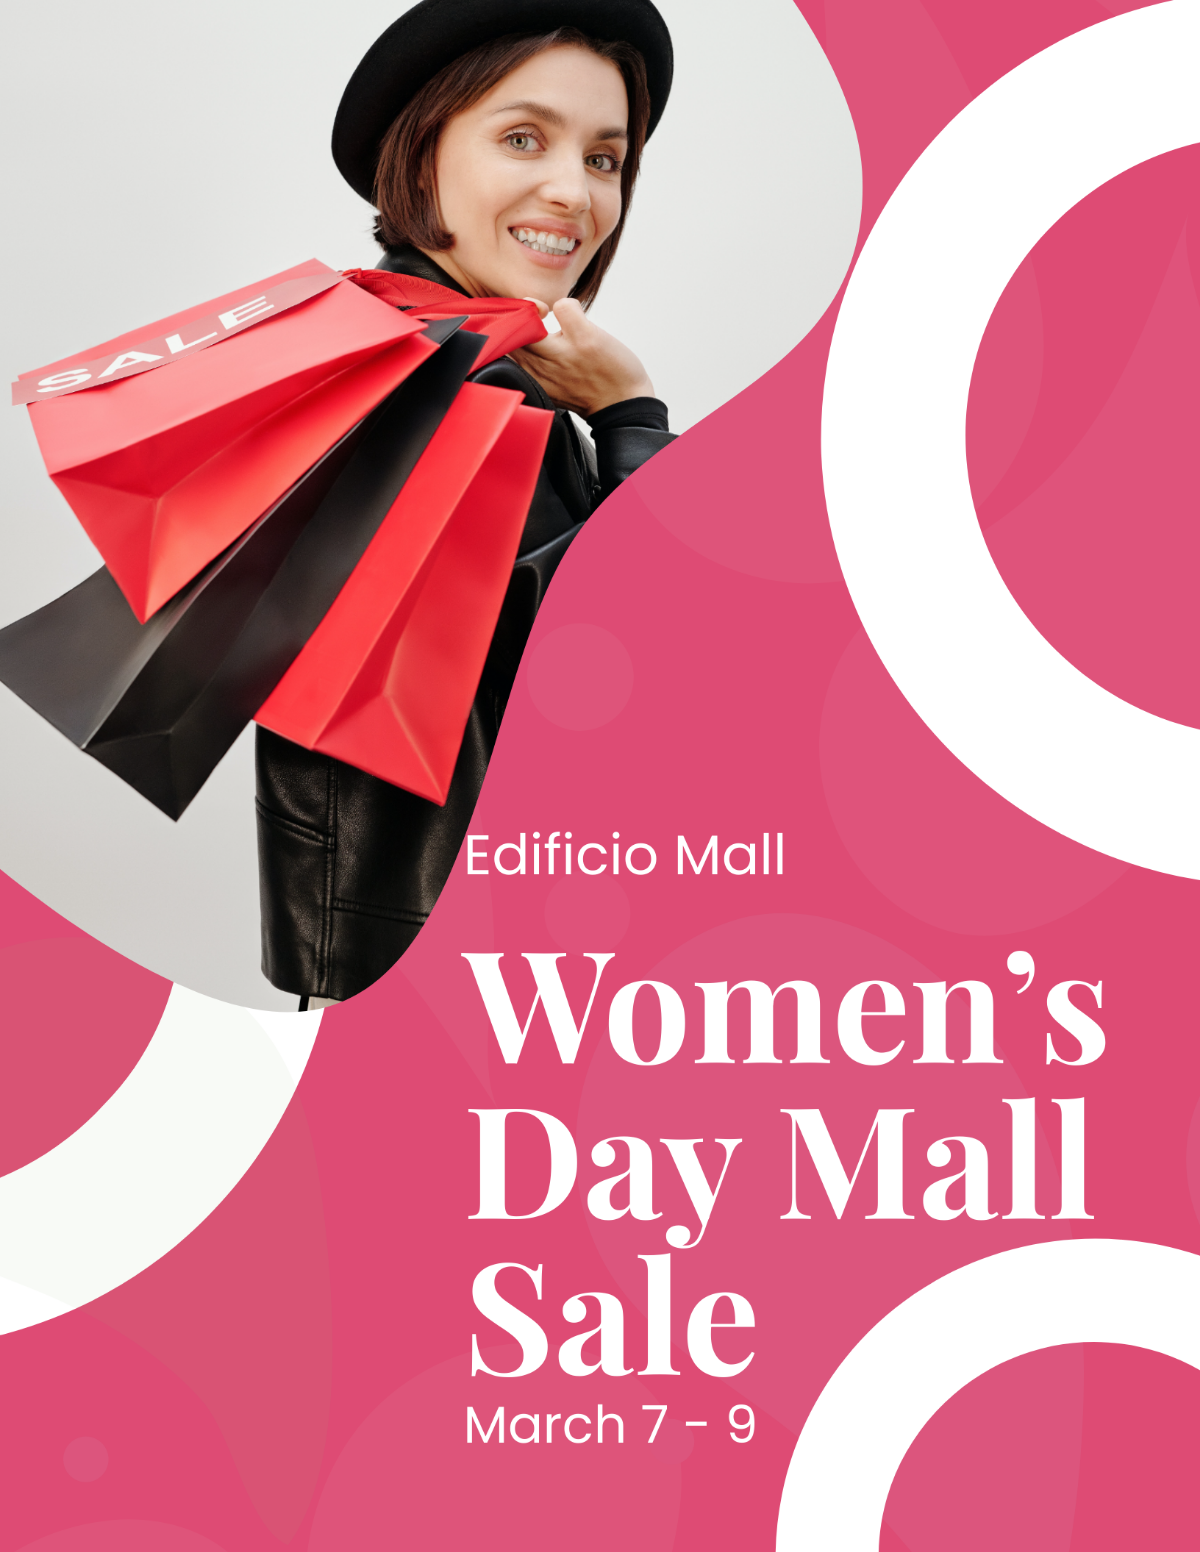 Women's Day Promotion Flyer Template